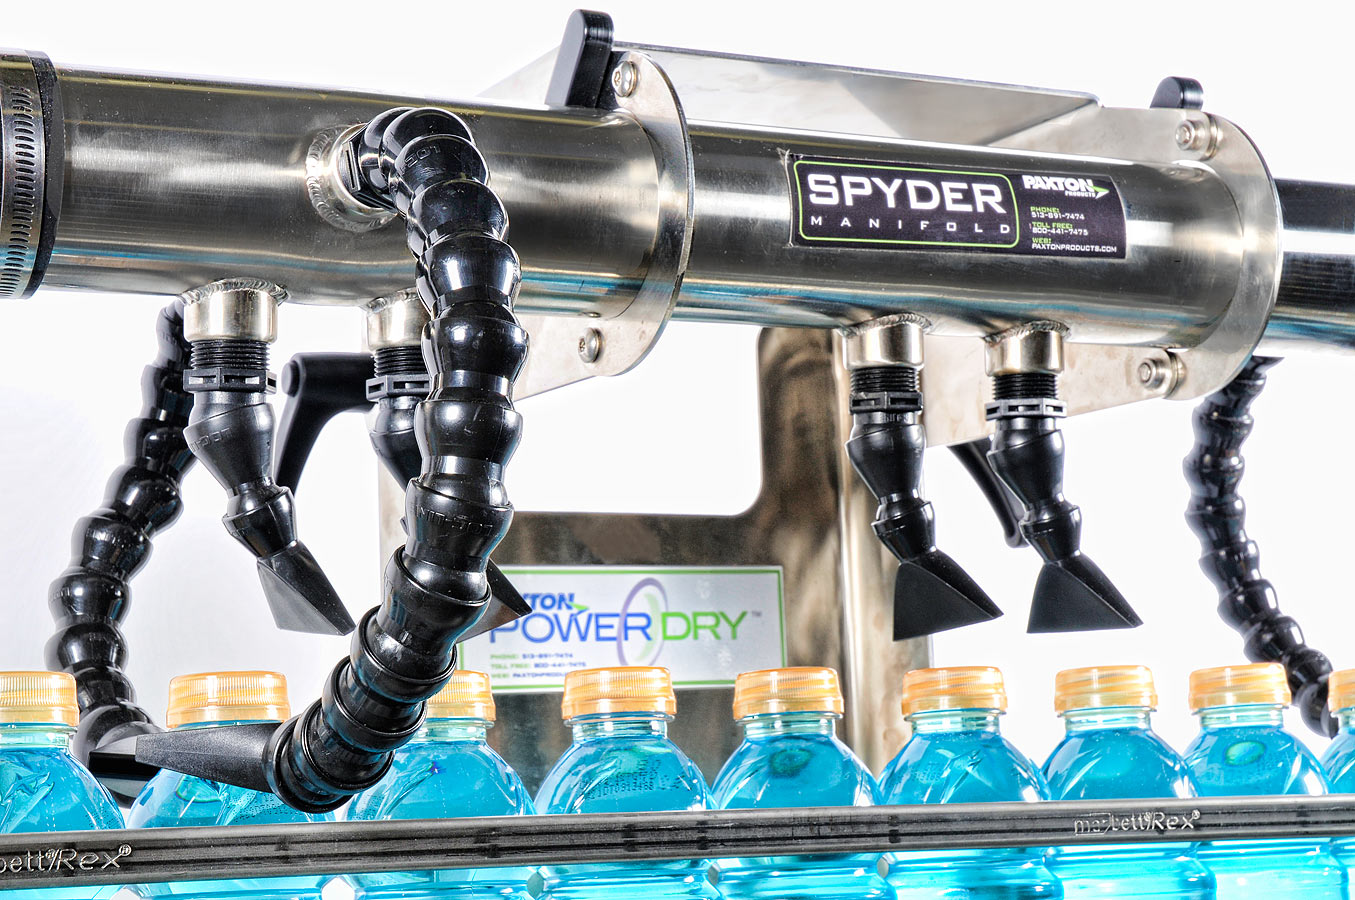 spyder can filling operation